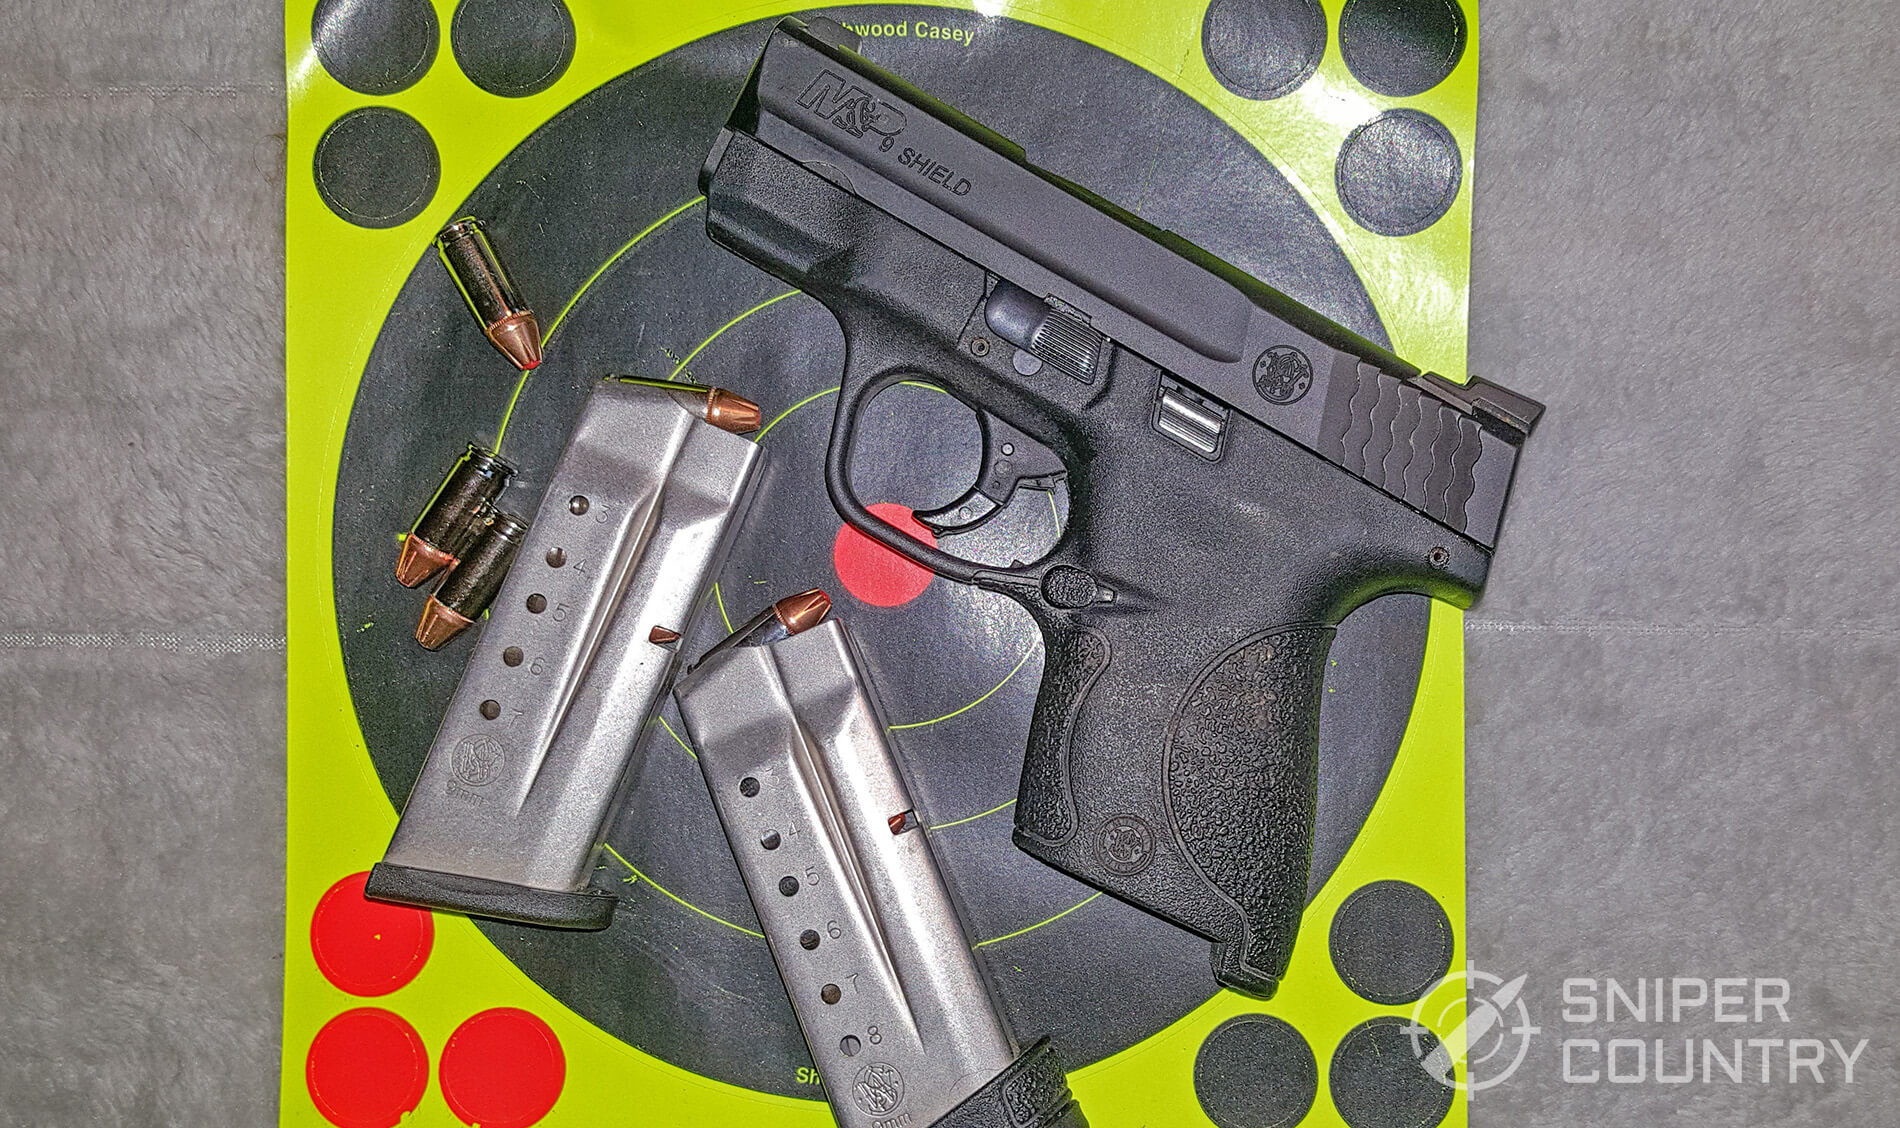 [Review] Smith & Wesson M&P Shield 9mm - Sniper Country